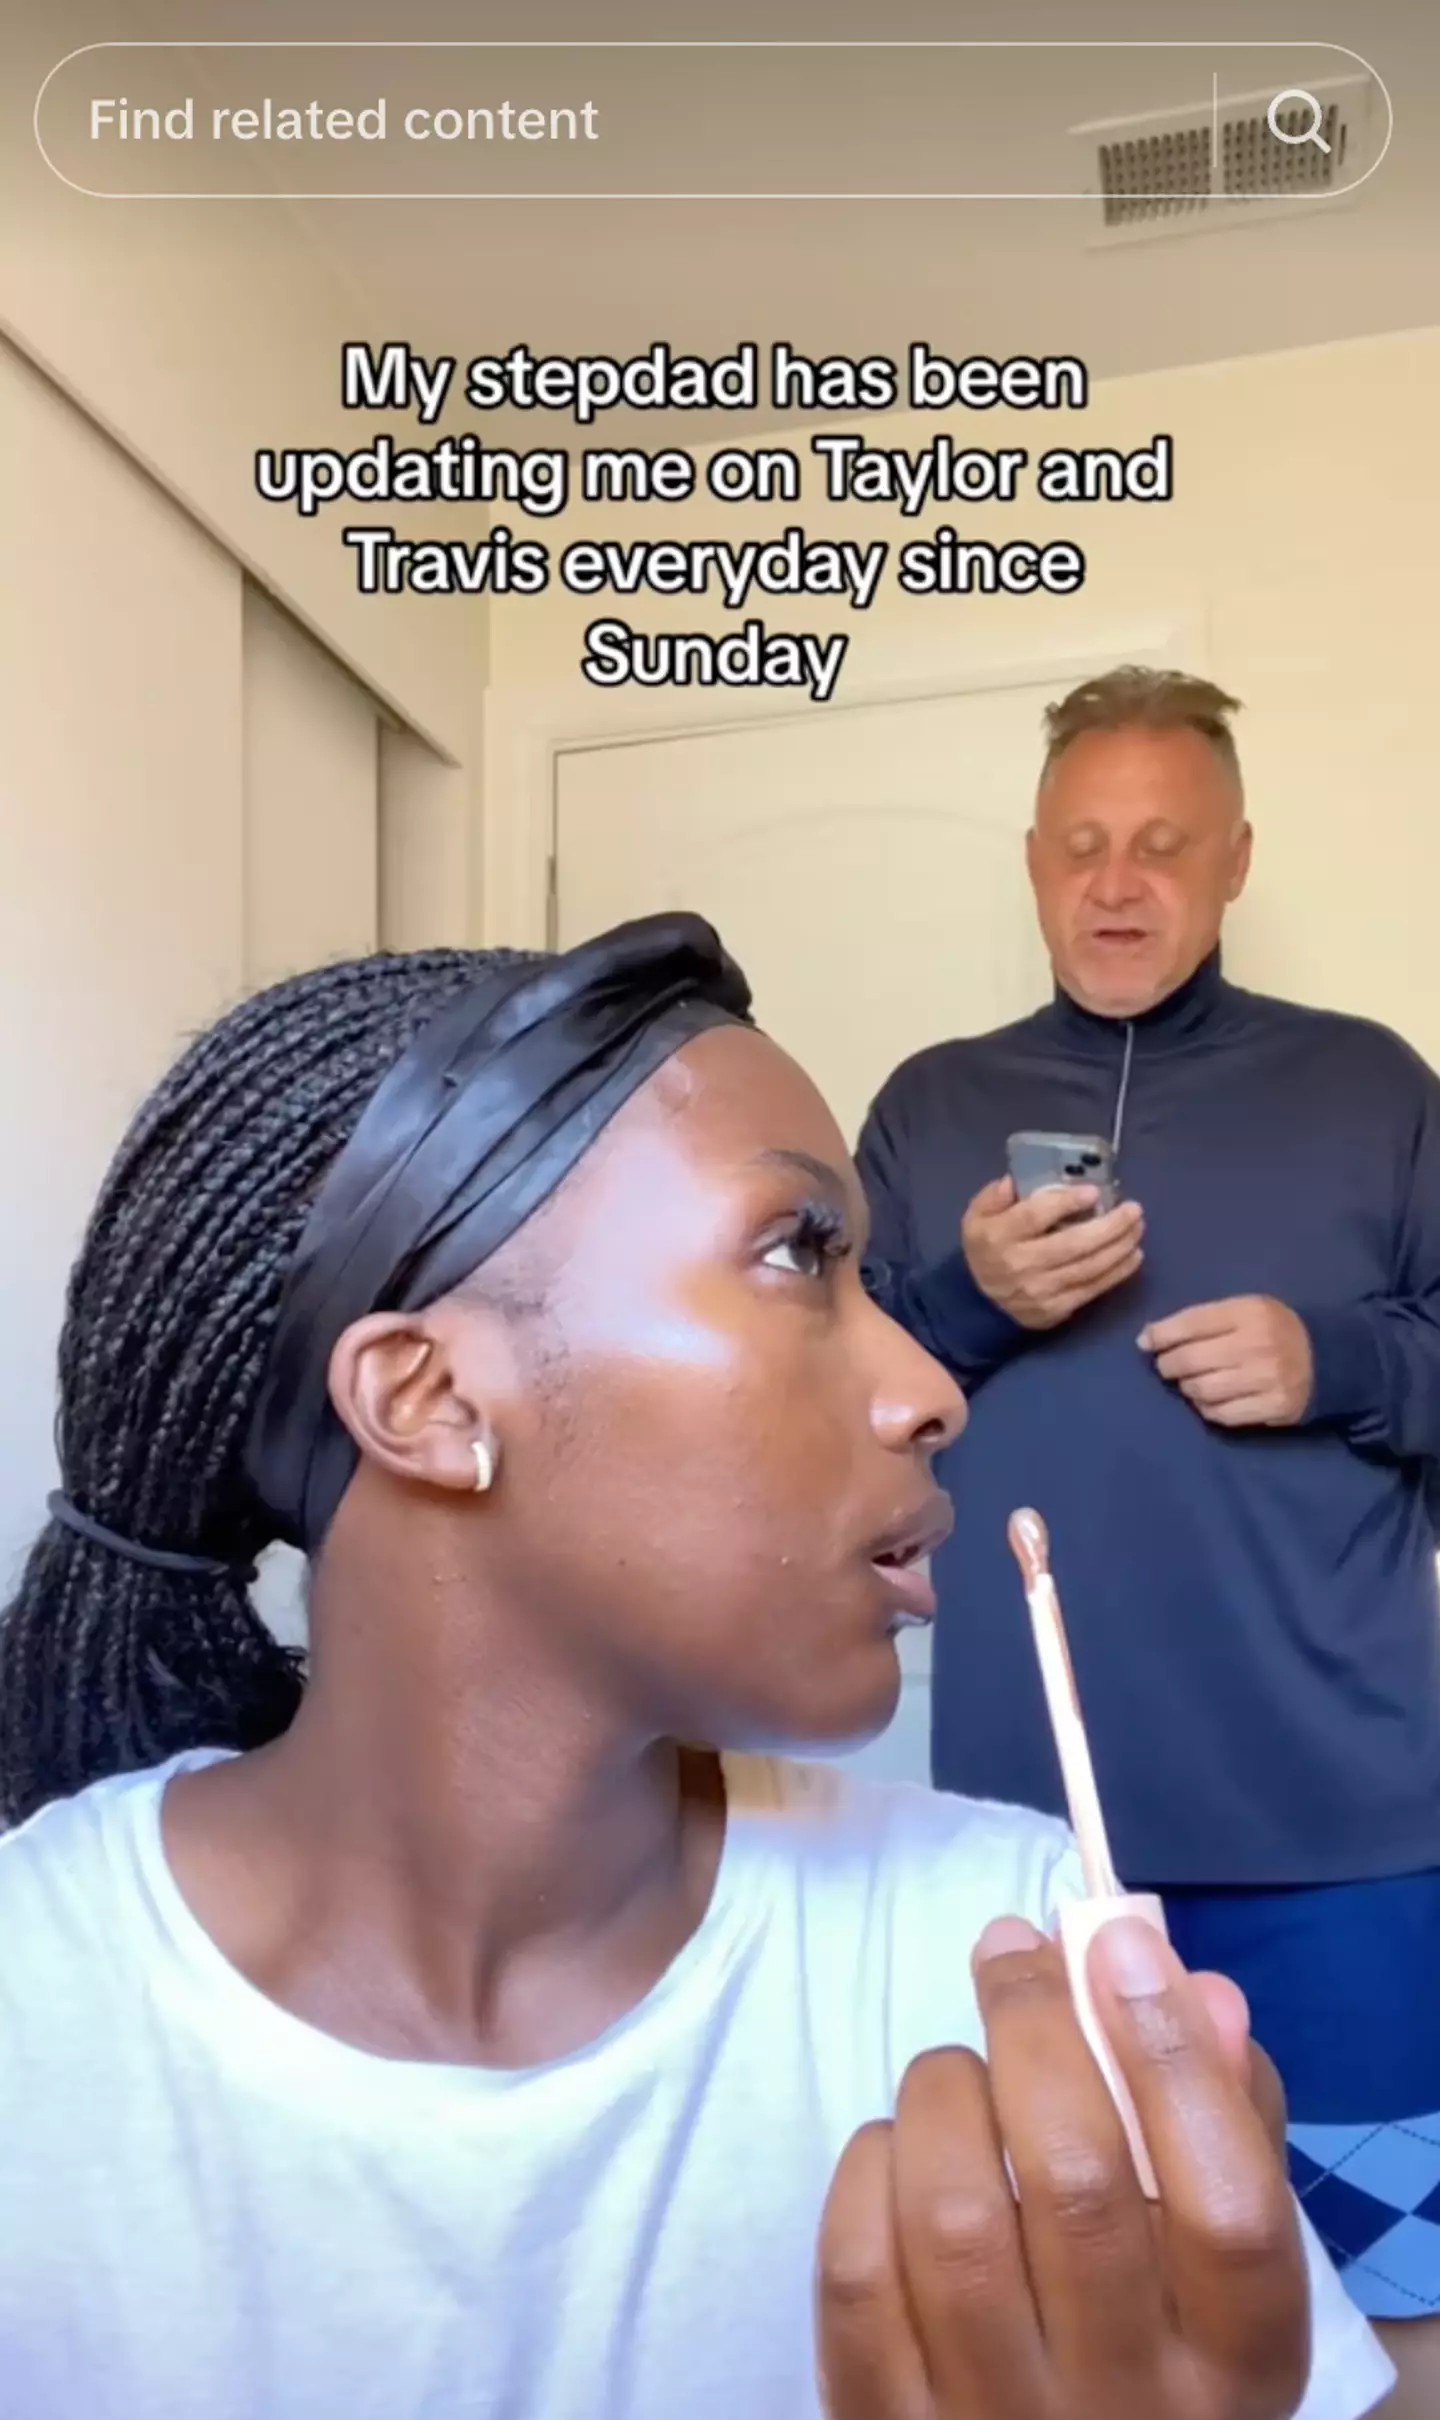 Sharon Mbabazi and her stepdad claimed skincare company Cetaphil 'stole' their content for their Super Bowl ad.